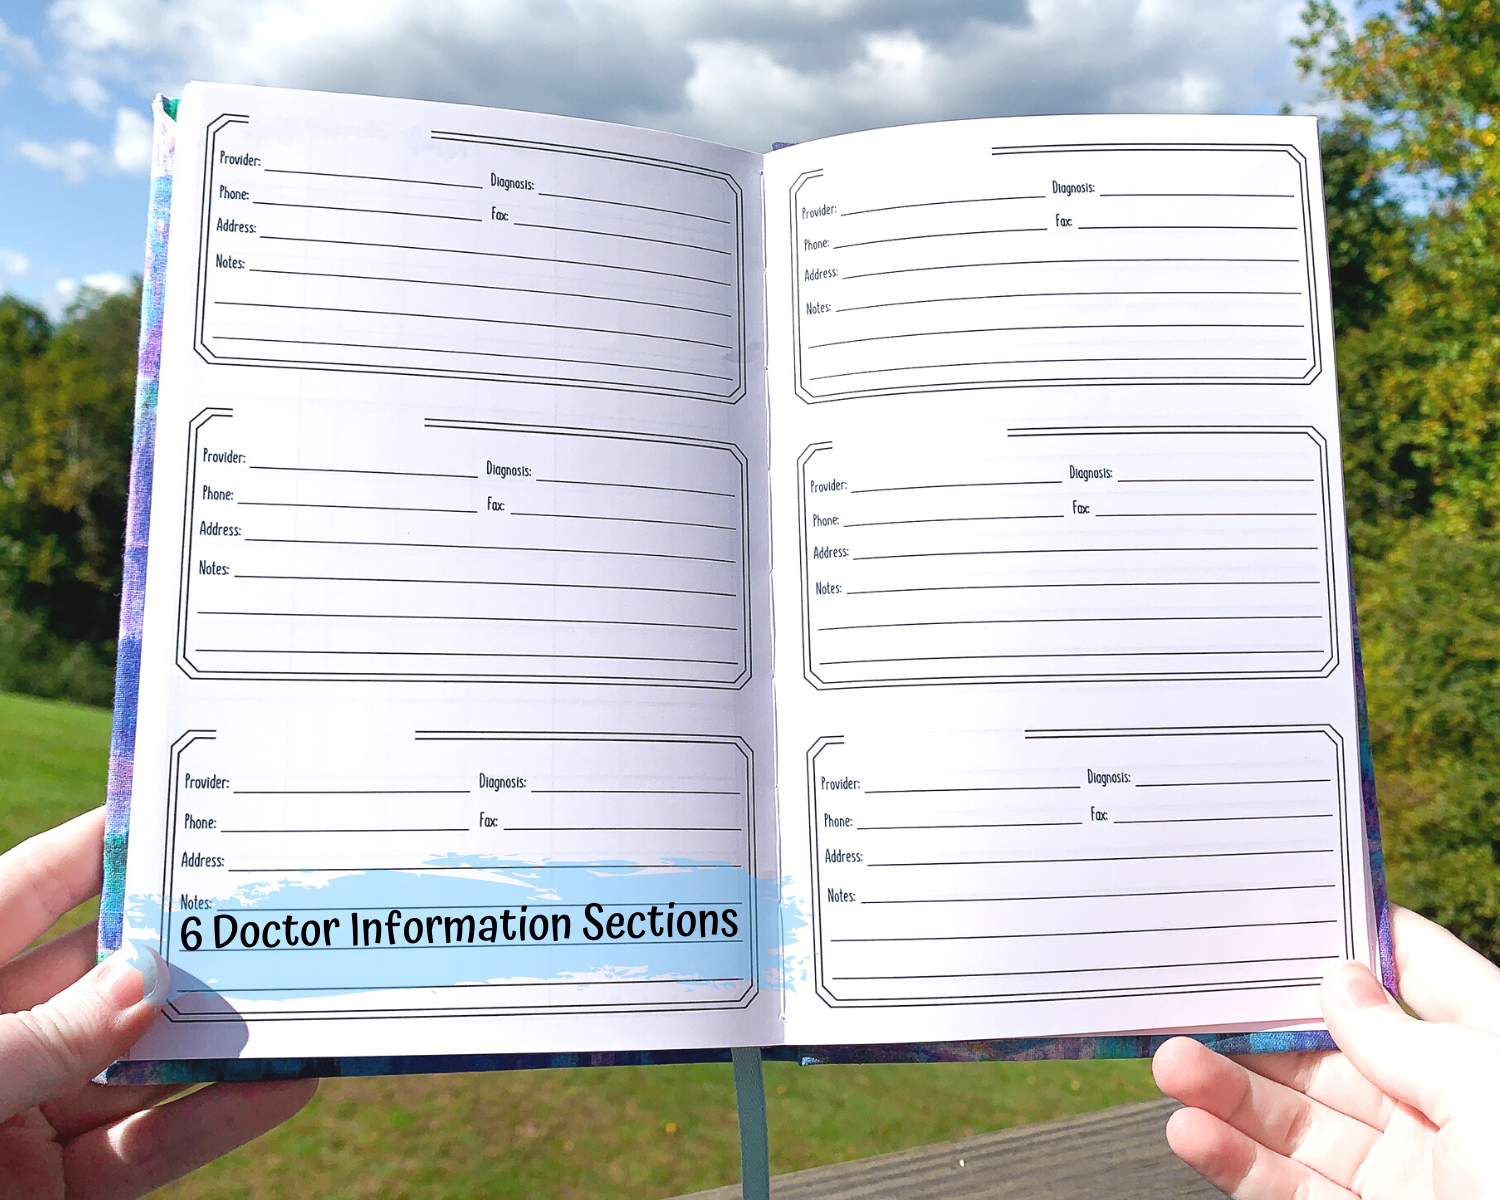 There are 6 boxes, 3 per page shown. A note say 6 Doctor Information Sections. Each box has writing lines for Provider, Diagnosis, Phone, Fax, Address, and 3 lines for notes.